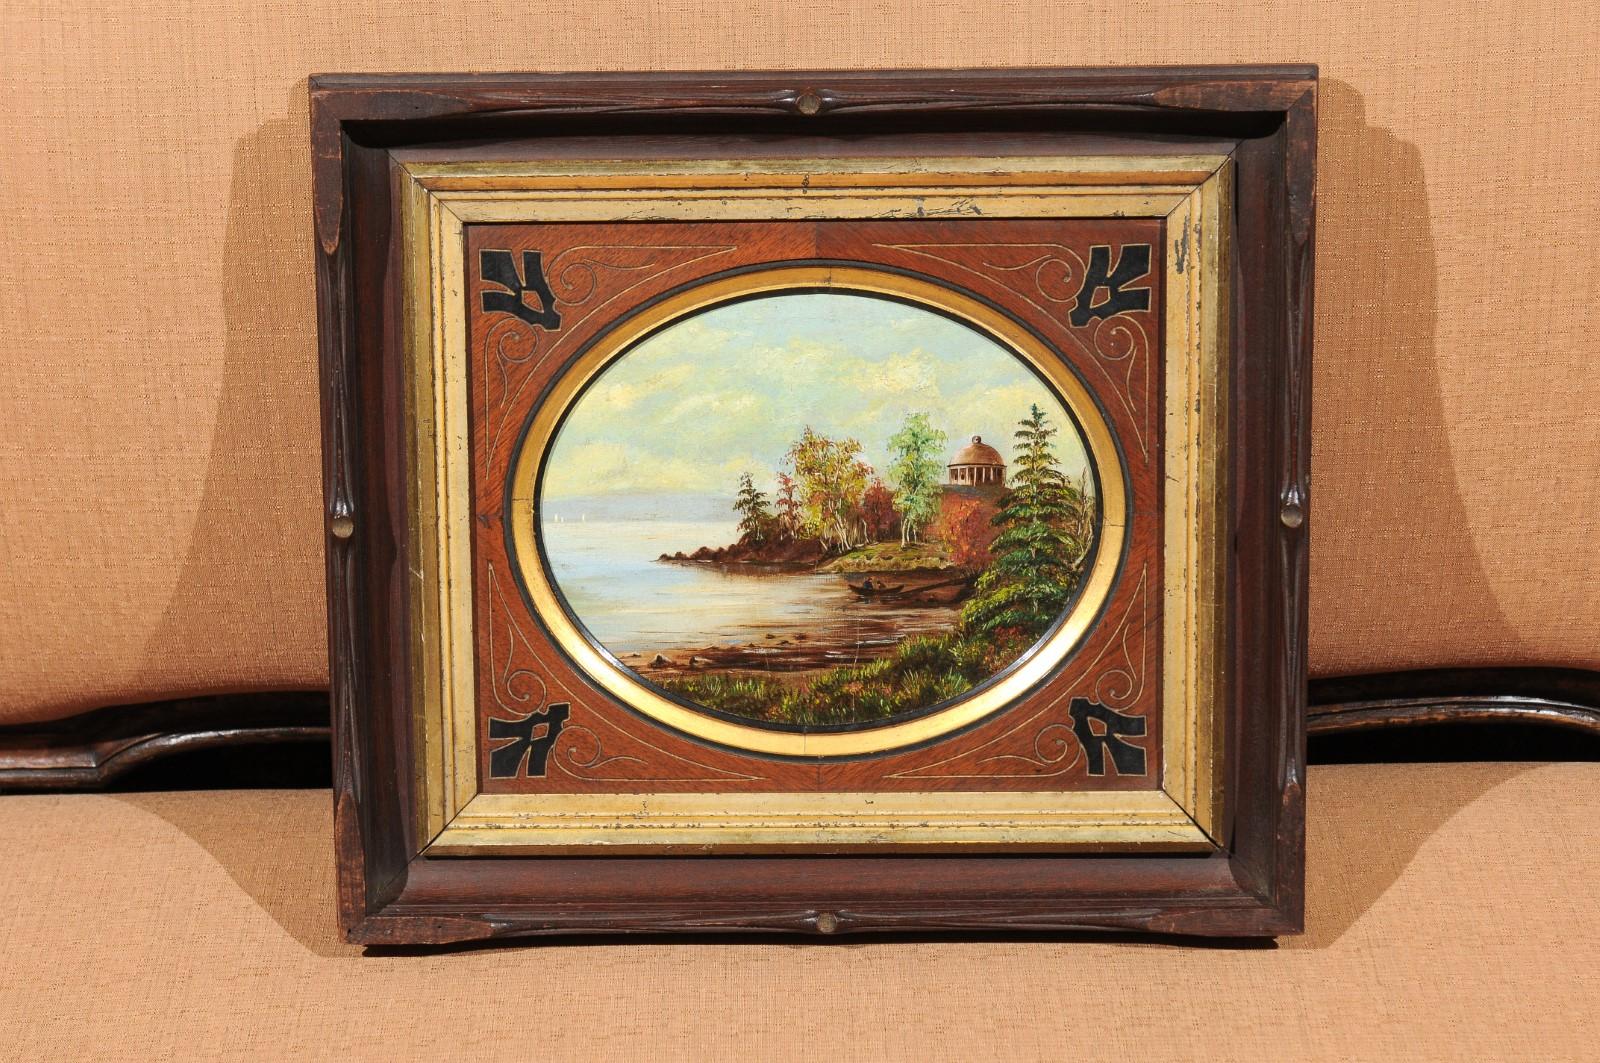 The 19th century oval oil on canvas painting of Hudson River & Washington's Tomb in mahogany wood matting with gilt and ebonized accents. The frame consist of giltwood and mahogany.



